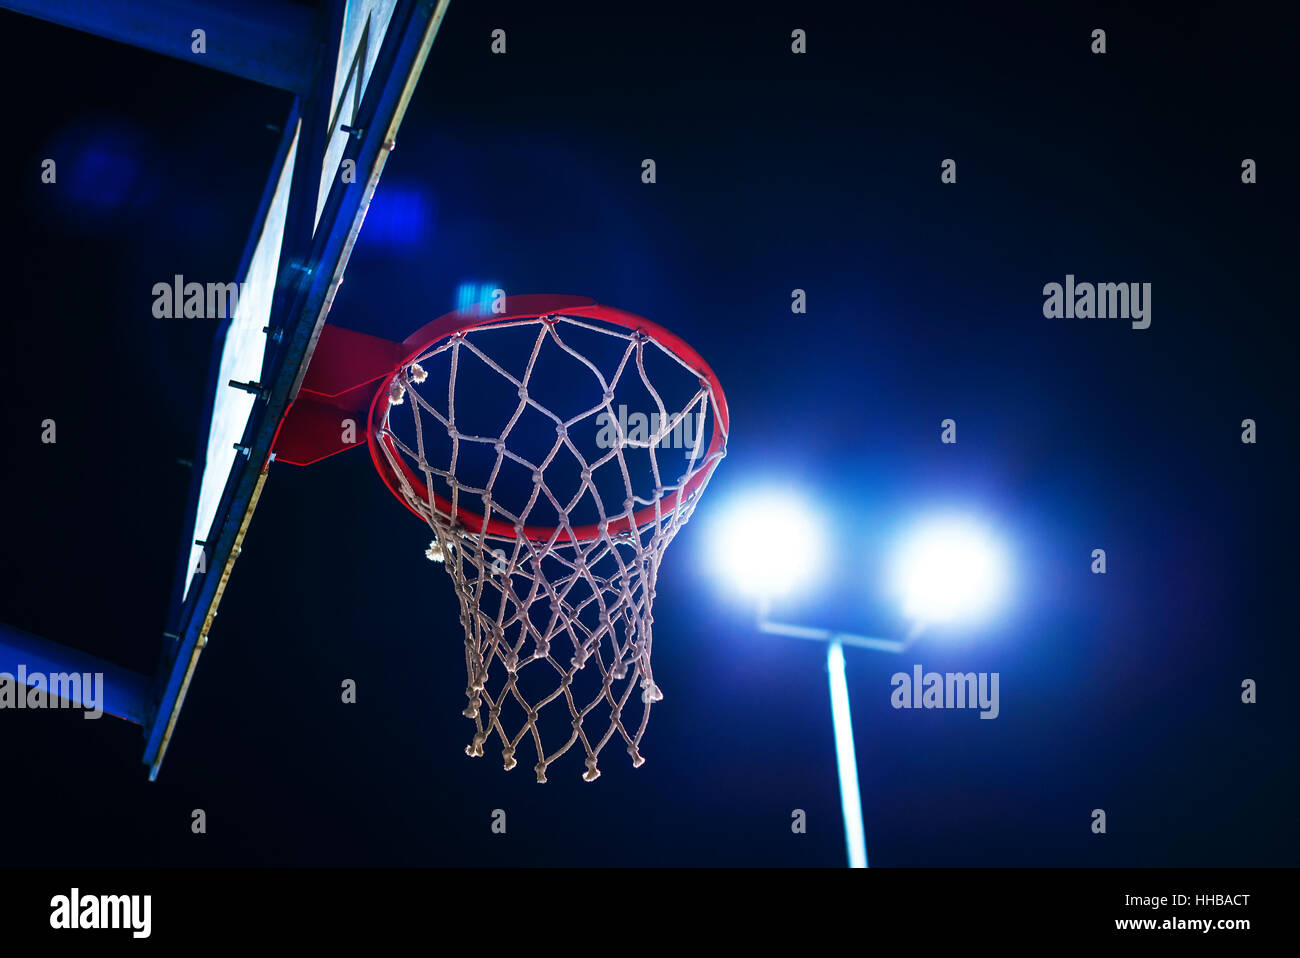 Basketball hoop on outdoor sport court at night with lens flare Stock Photo